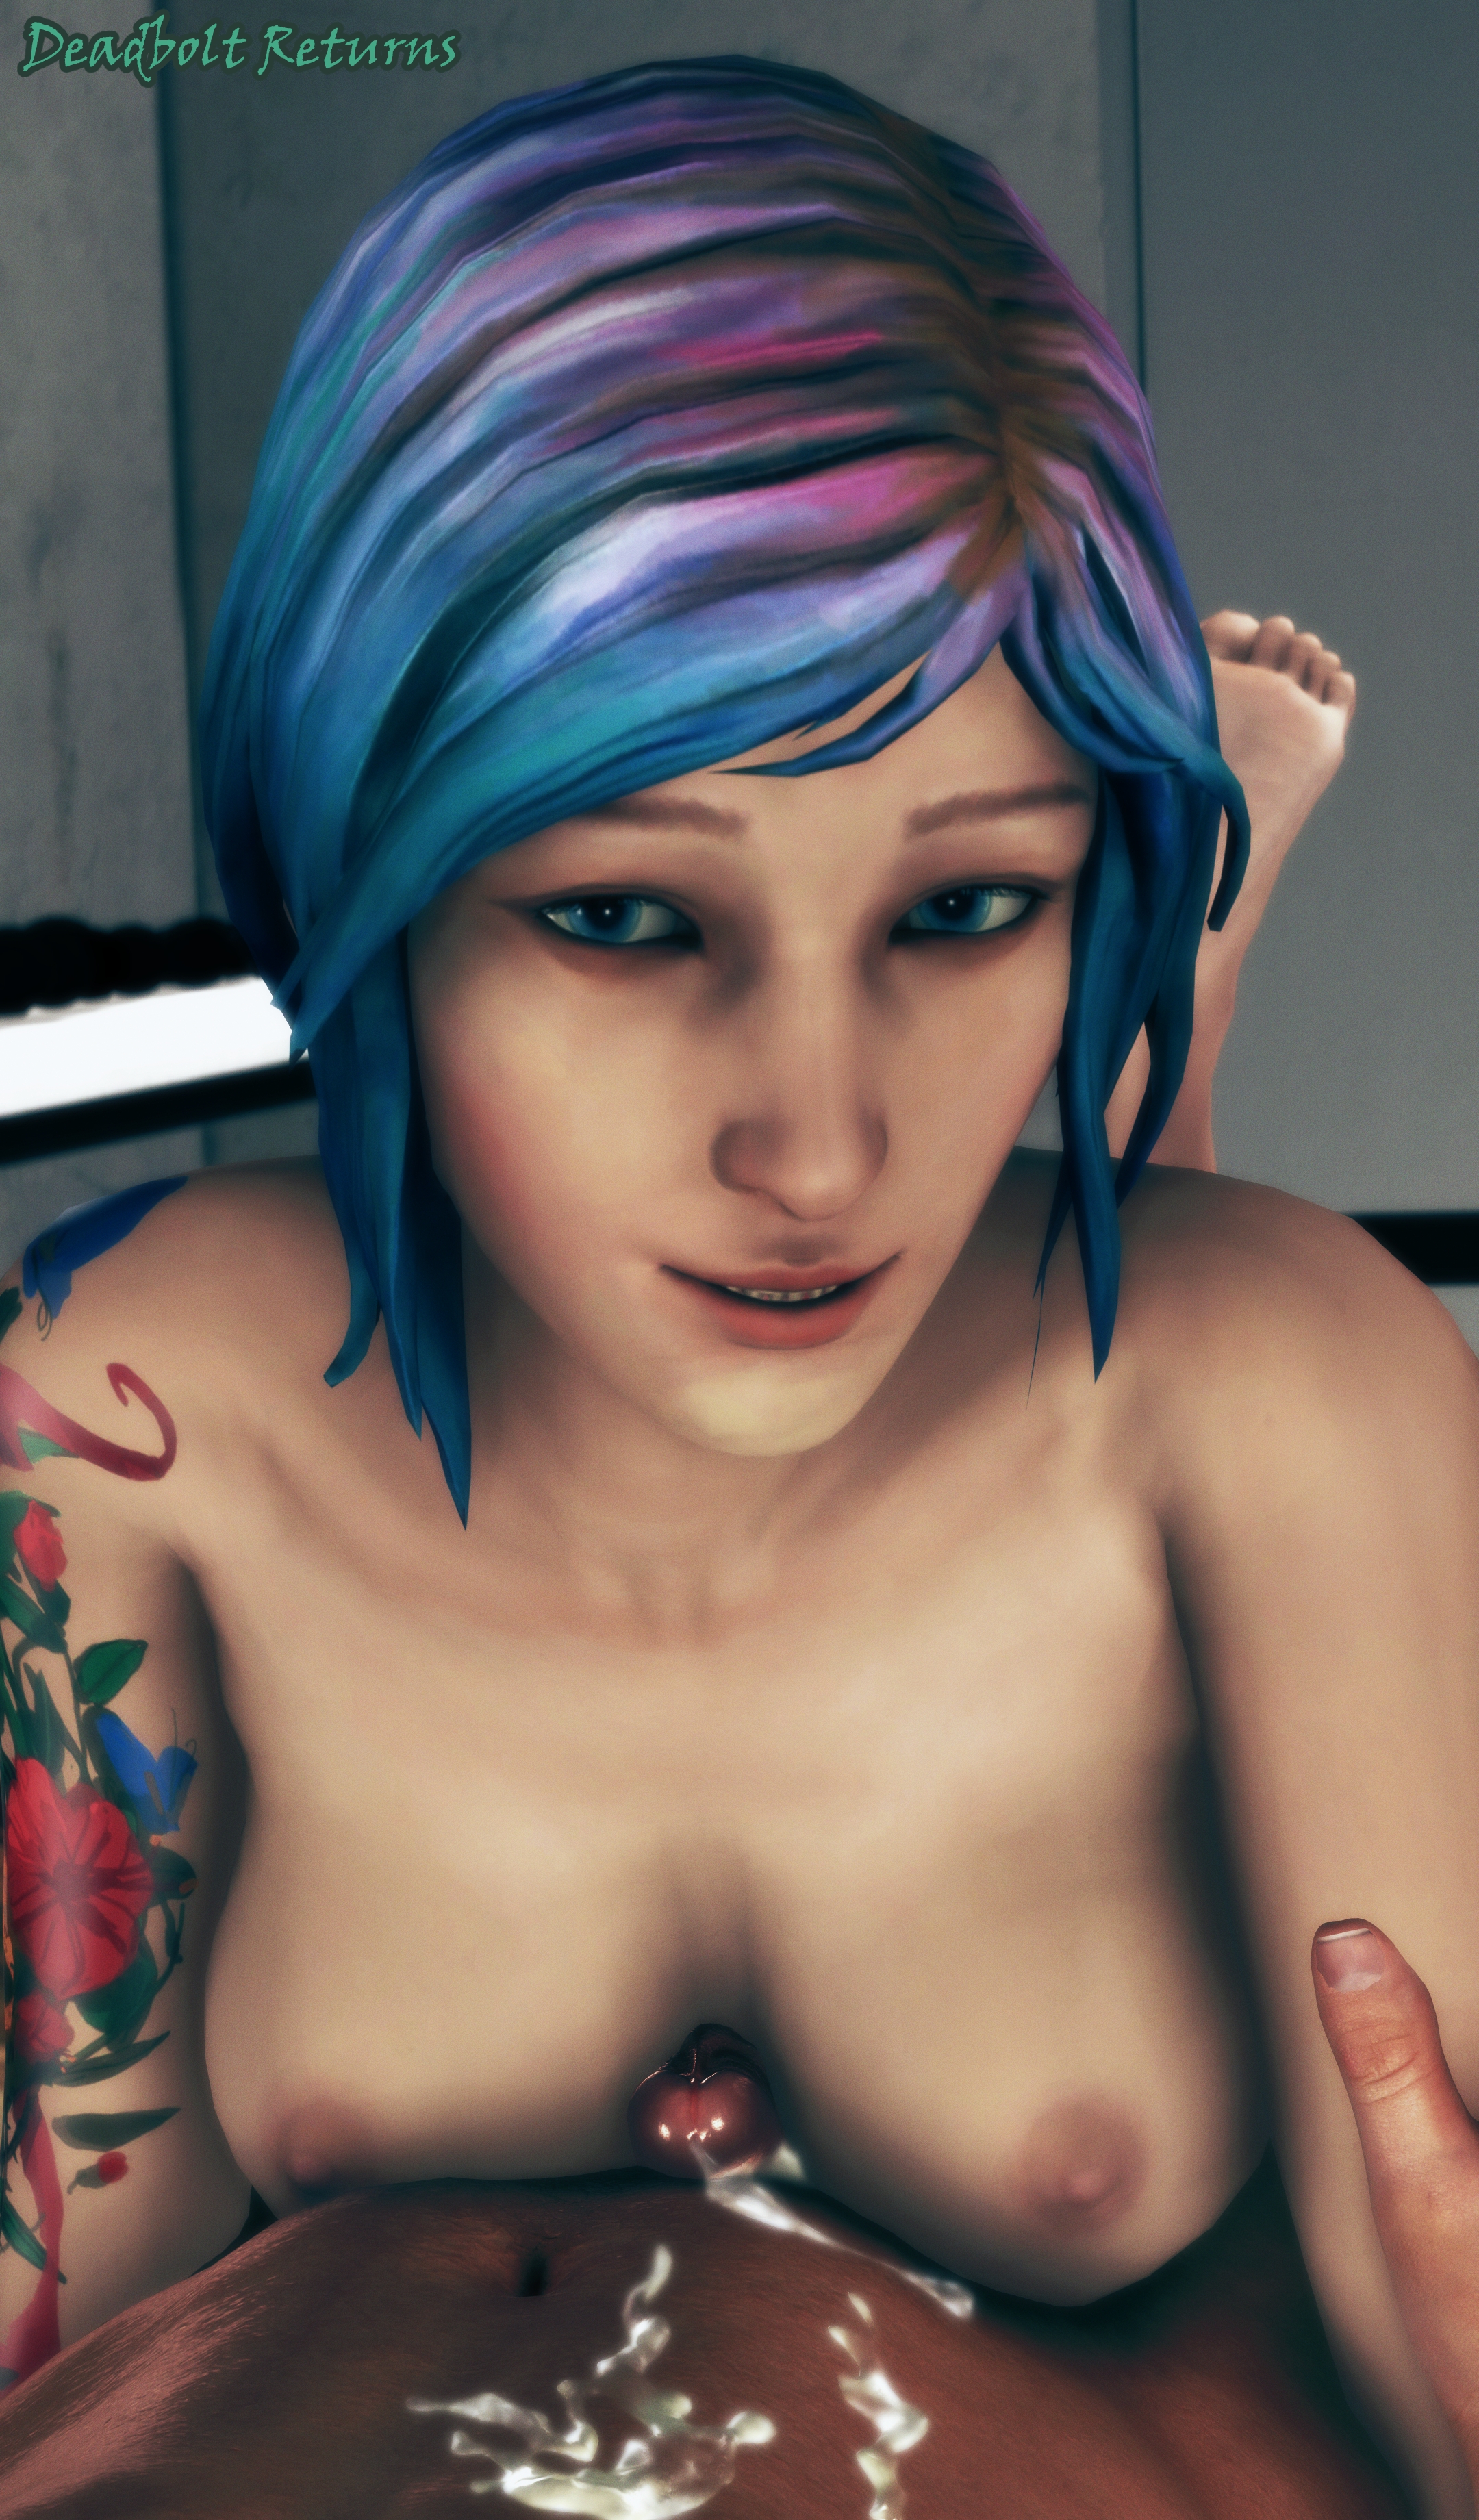 Chloe Price Returns to the Casting Couch Chloe Price Chloe Life Is Strange Sfm Source Filmmaker Rule34 Rule 34 3d Porn 3d Girl 3dnsfw Nsfw Casting Couch 12